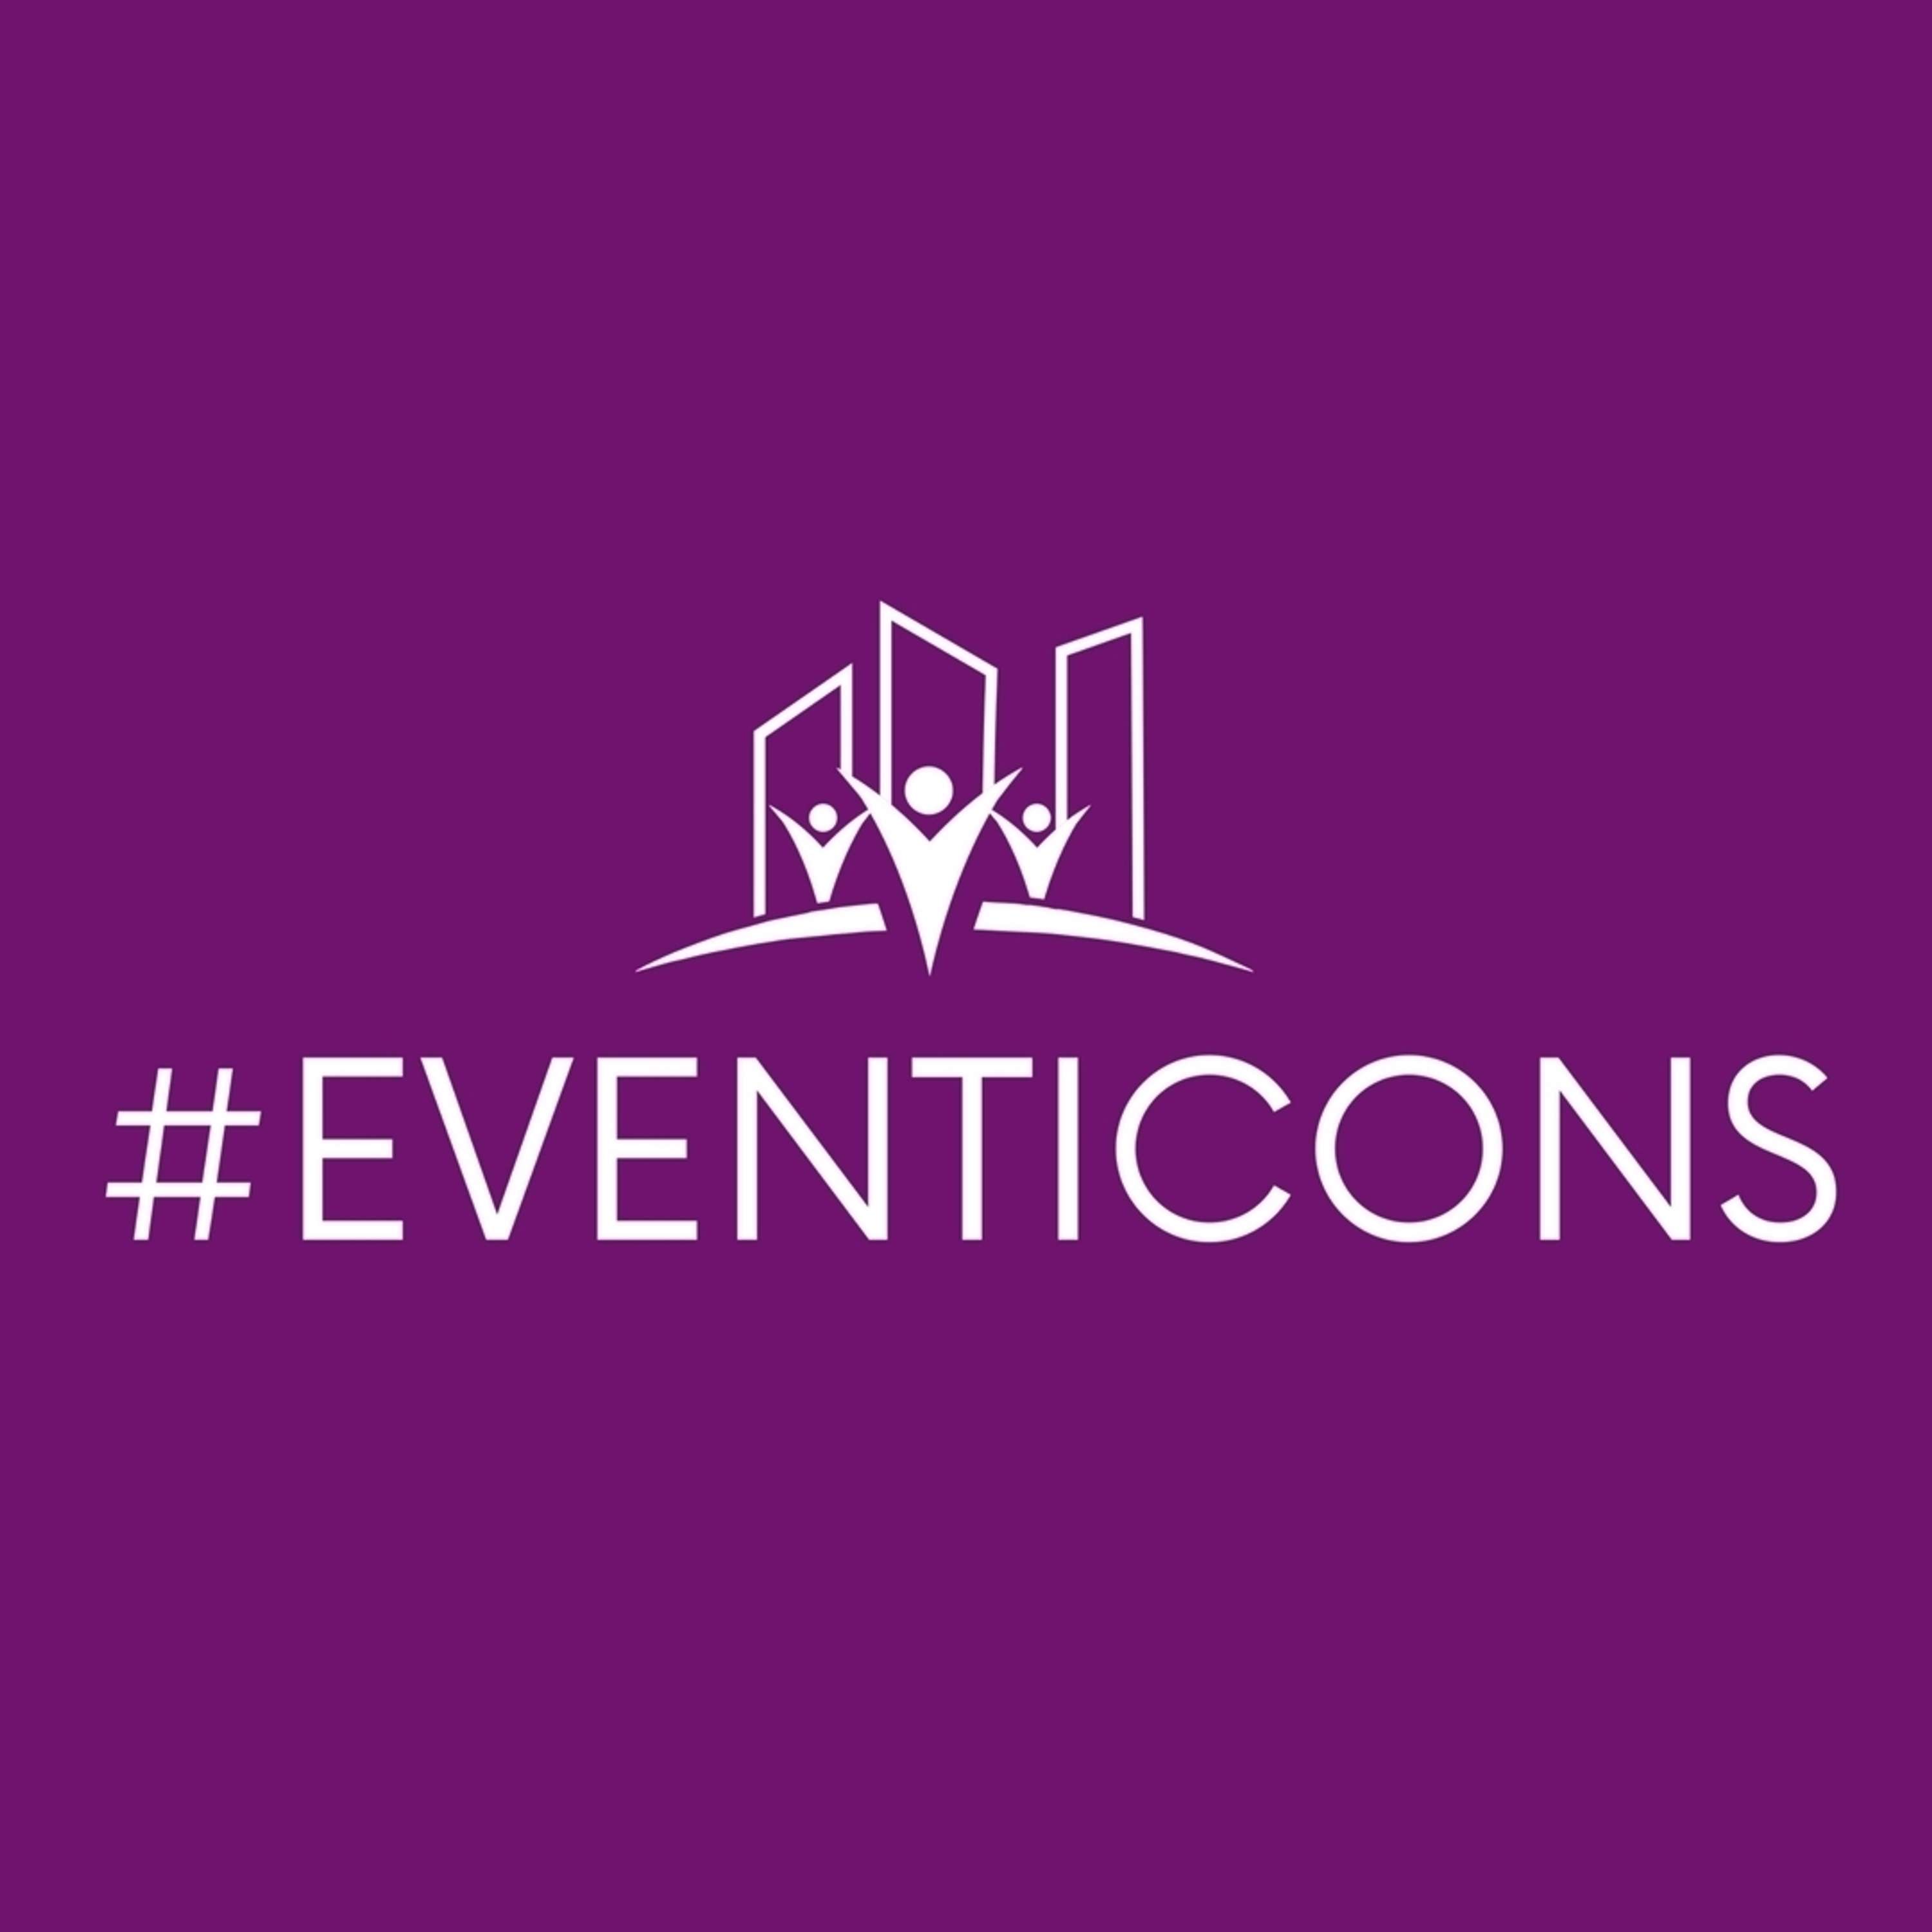 Alcohol In Events: Best Practices To Ensure Safety & Tackle Potential Issues